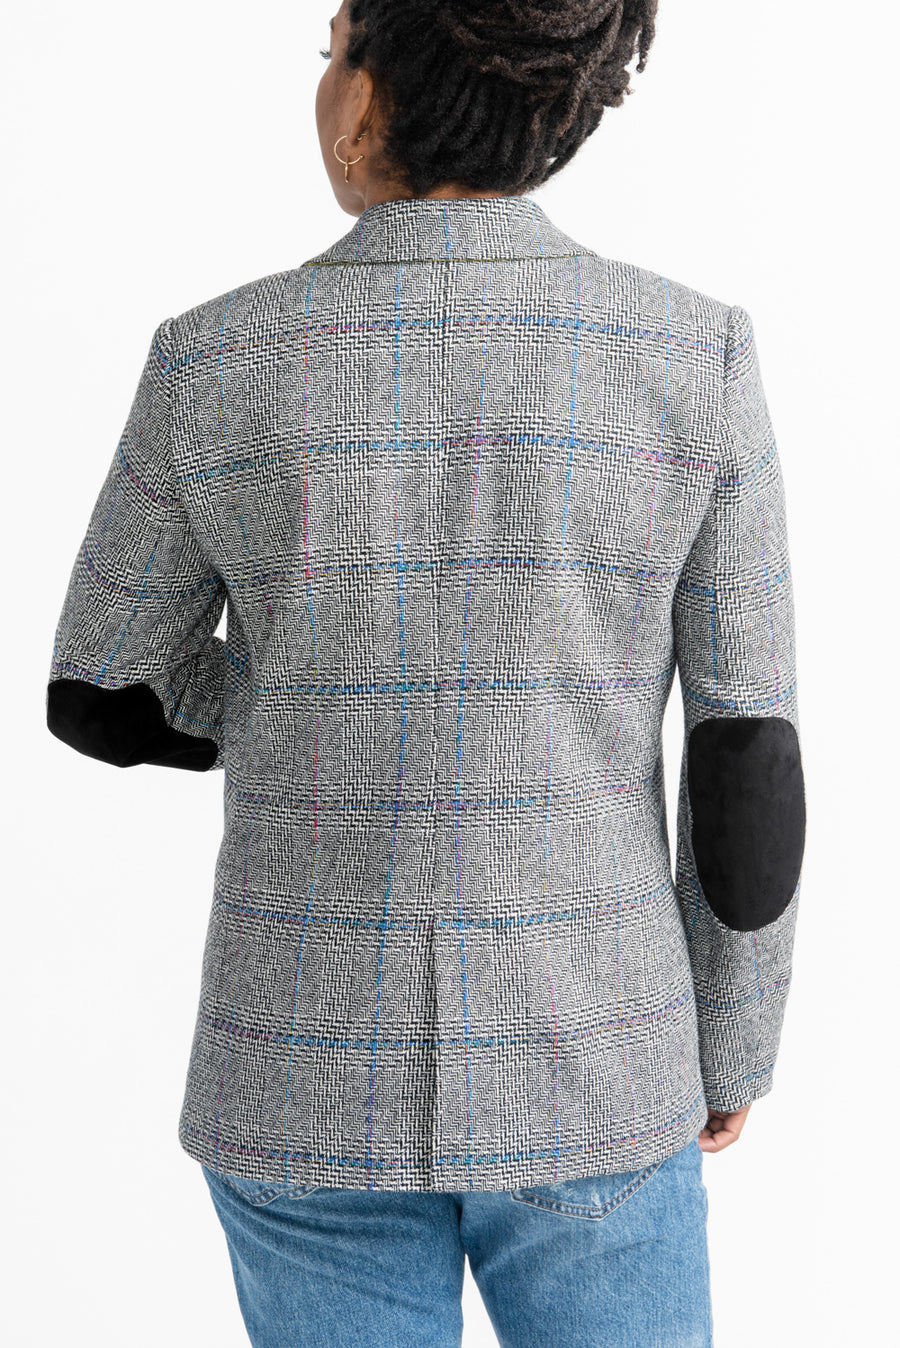 How to Style a Tweed Jacket – StudioSuits